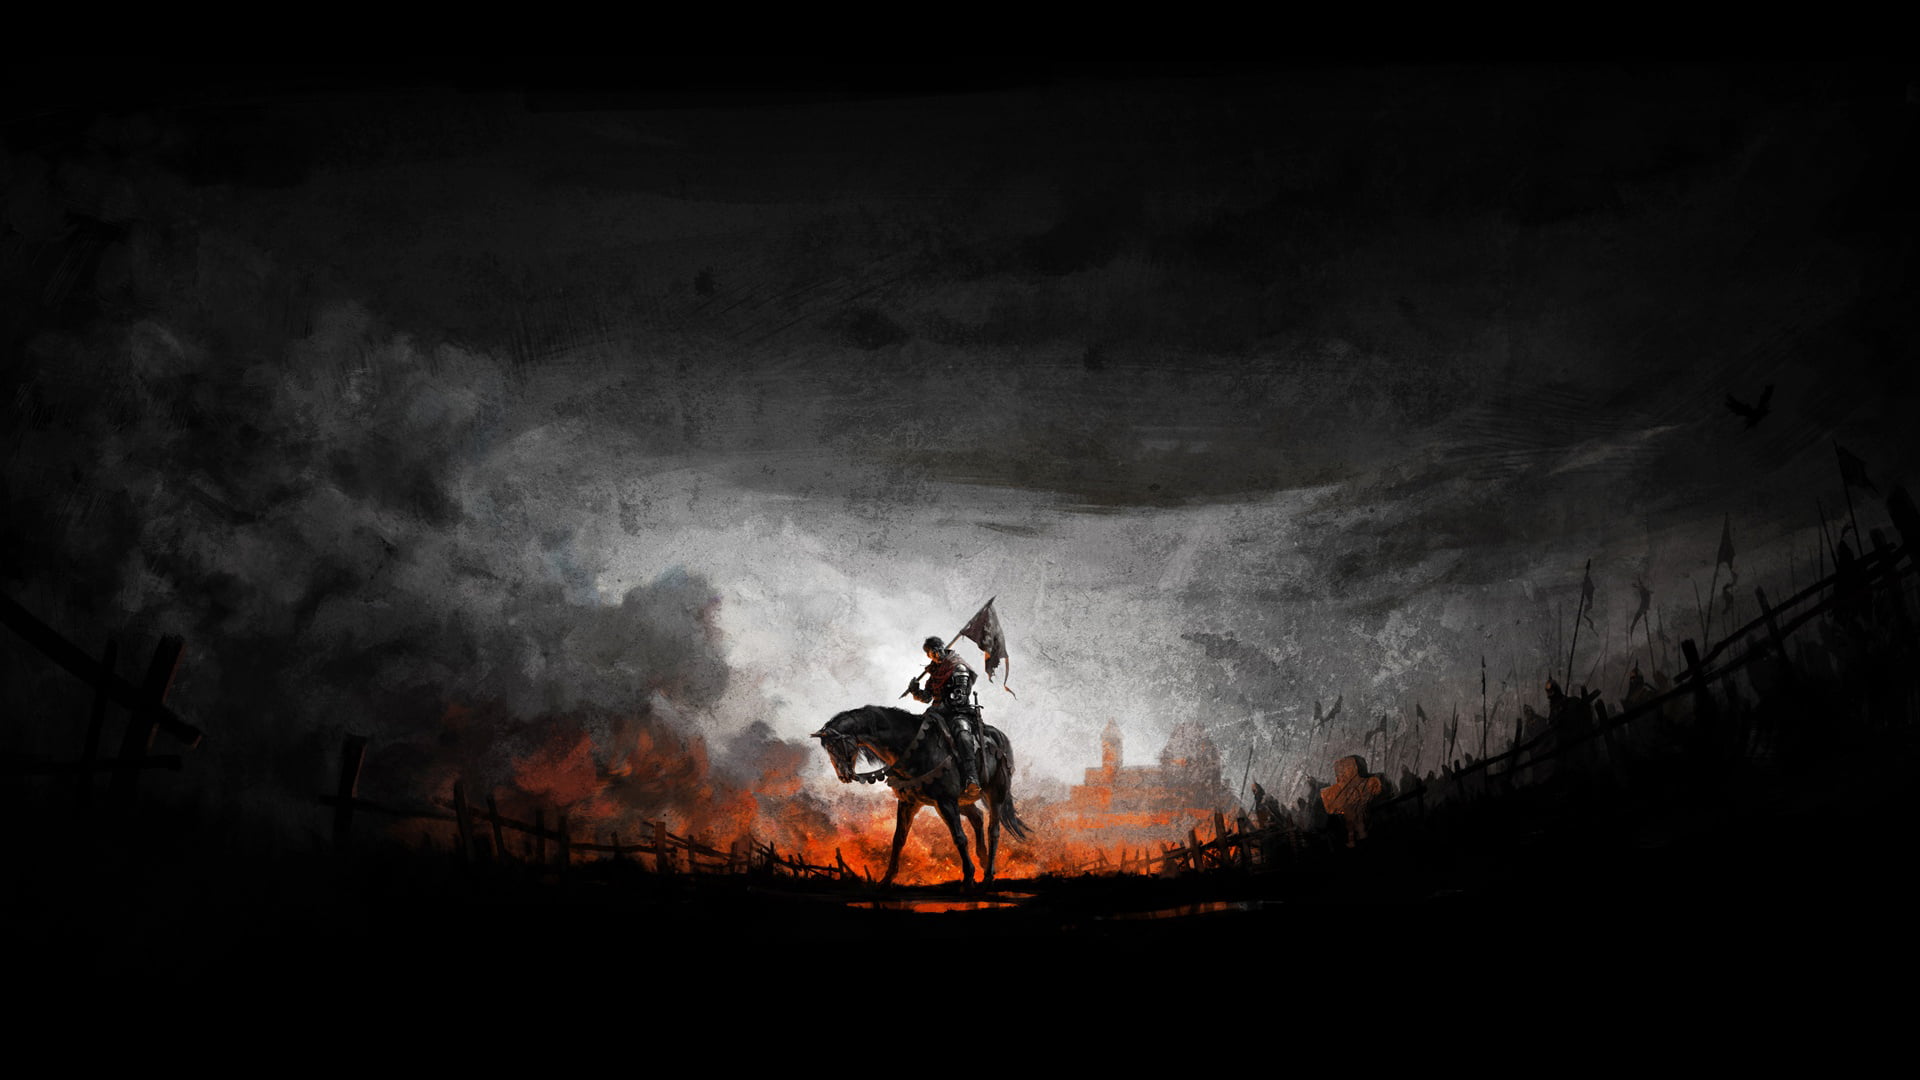 man riding horse wallpaper, person riding horse during night time